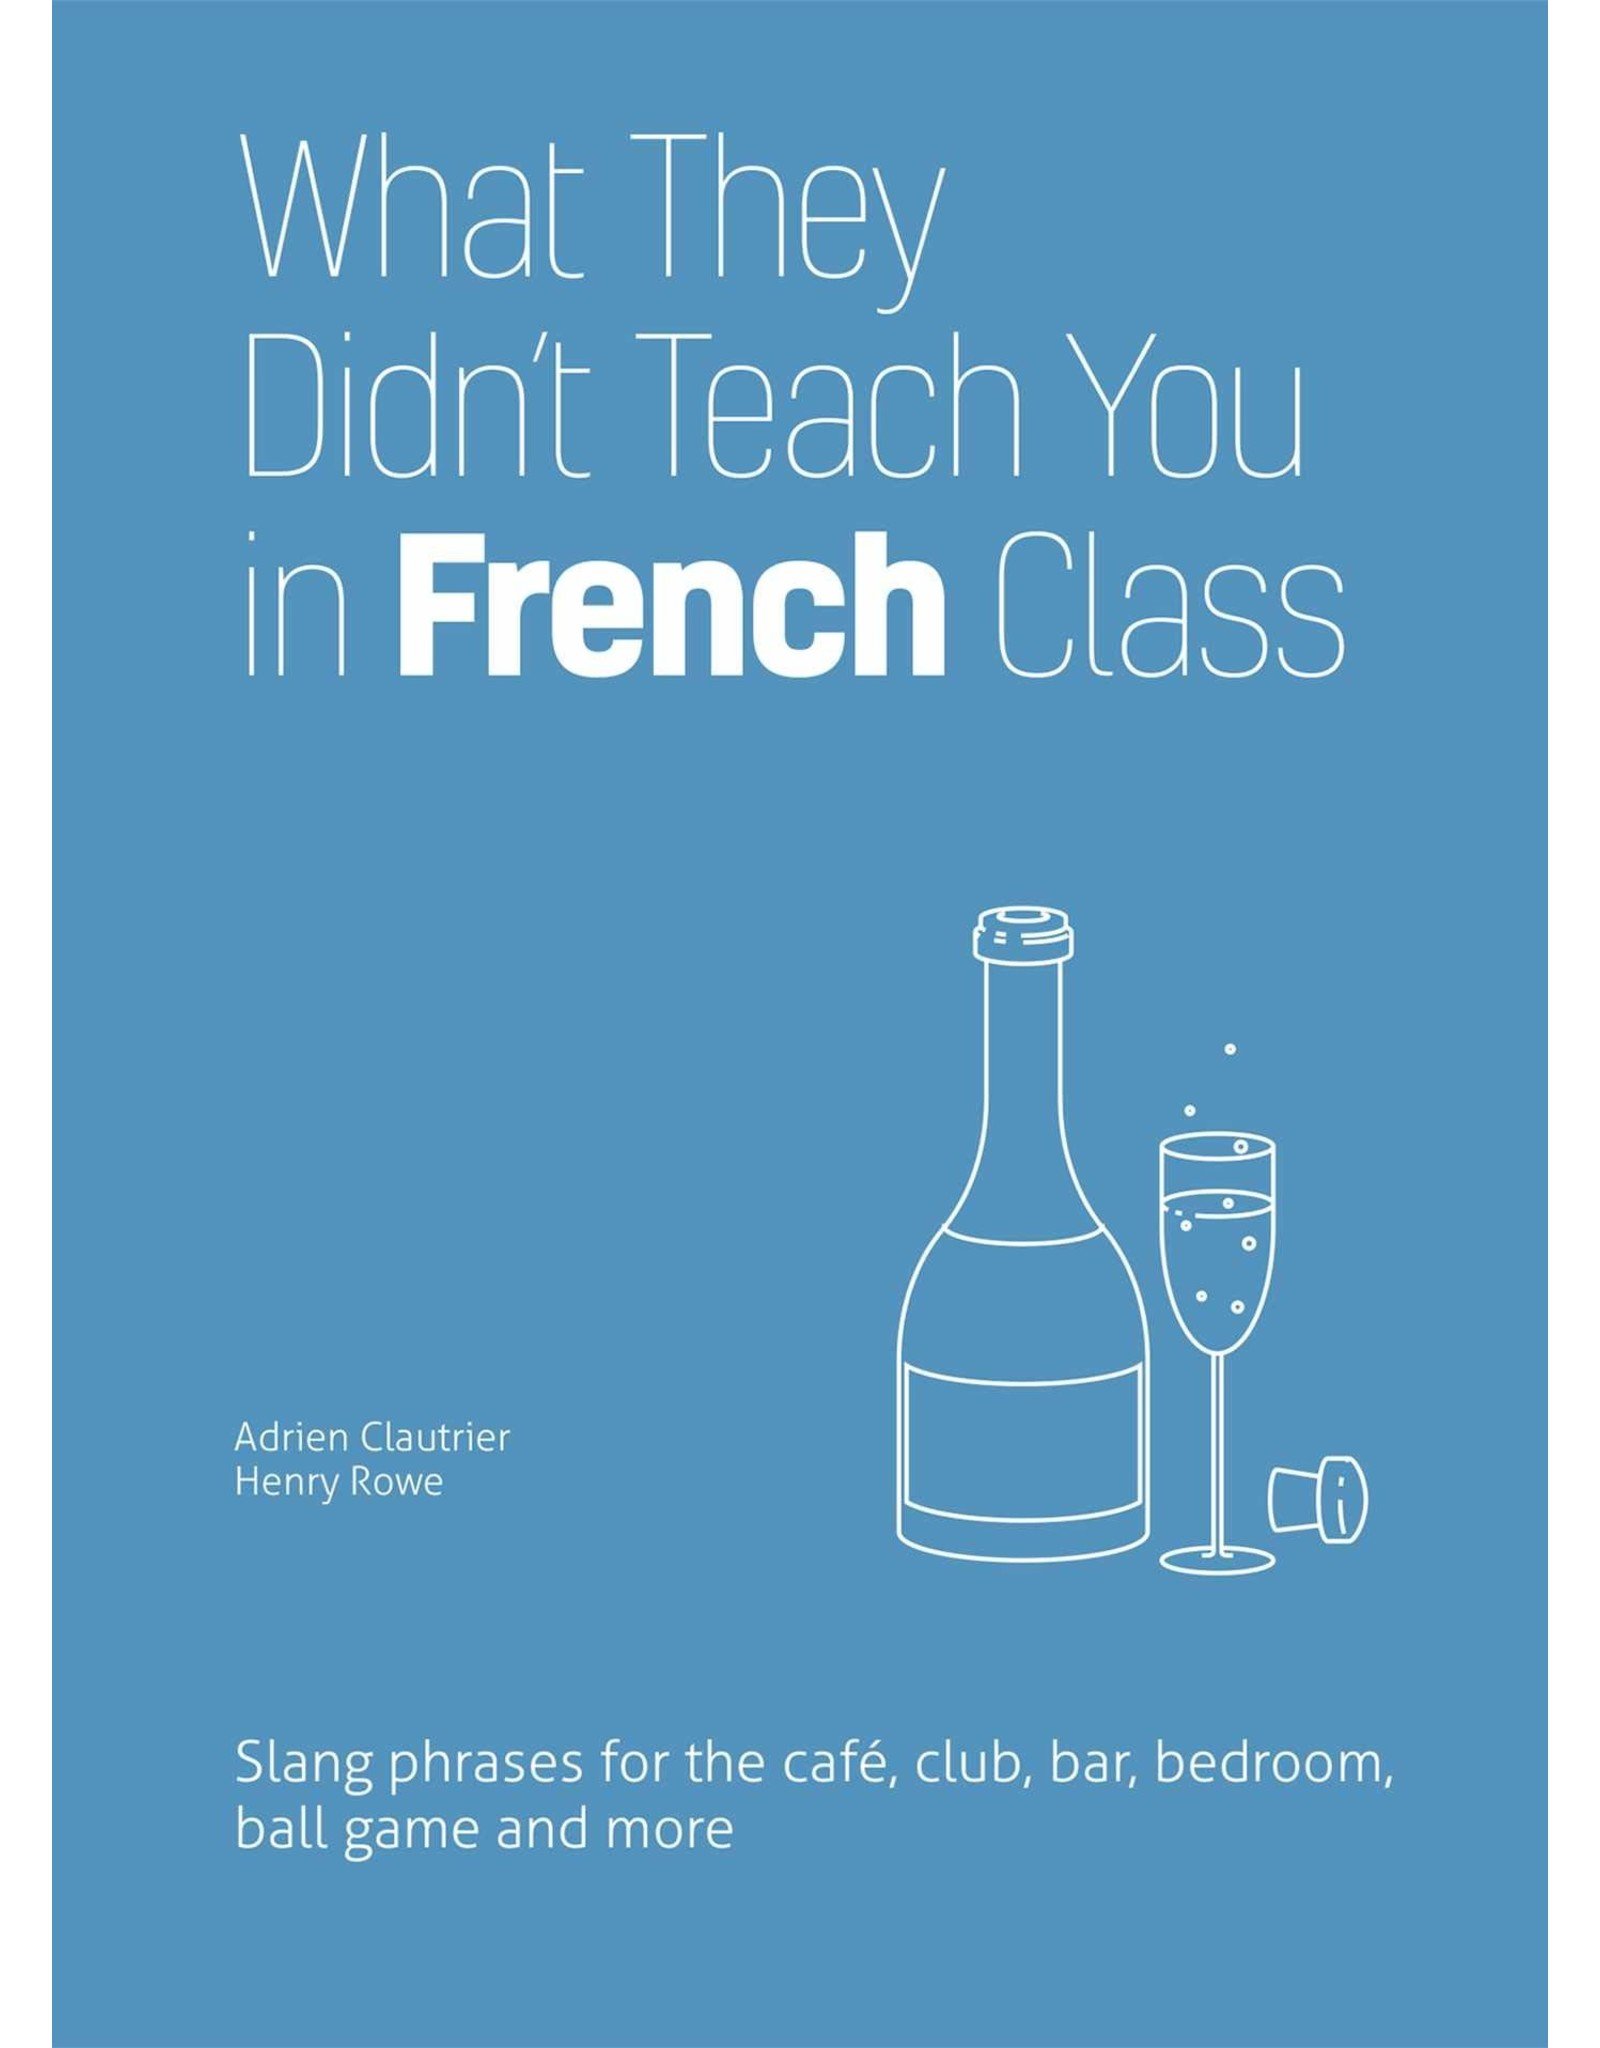 Literature What They Didn't Teach You in French Class: Slang Phrases for the Cafe, Club, Bar, Bedroom, Ball Game and More